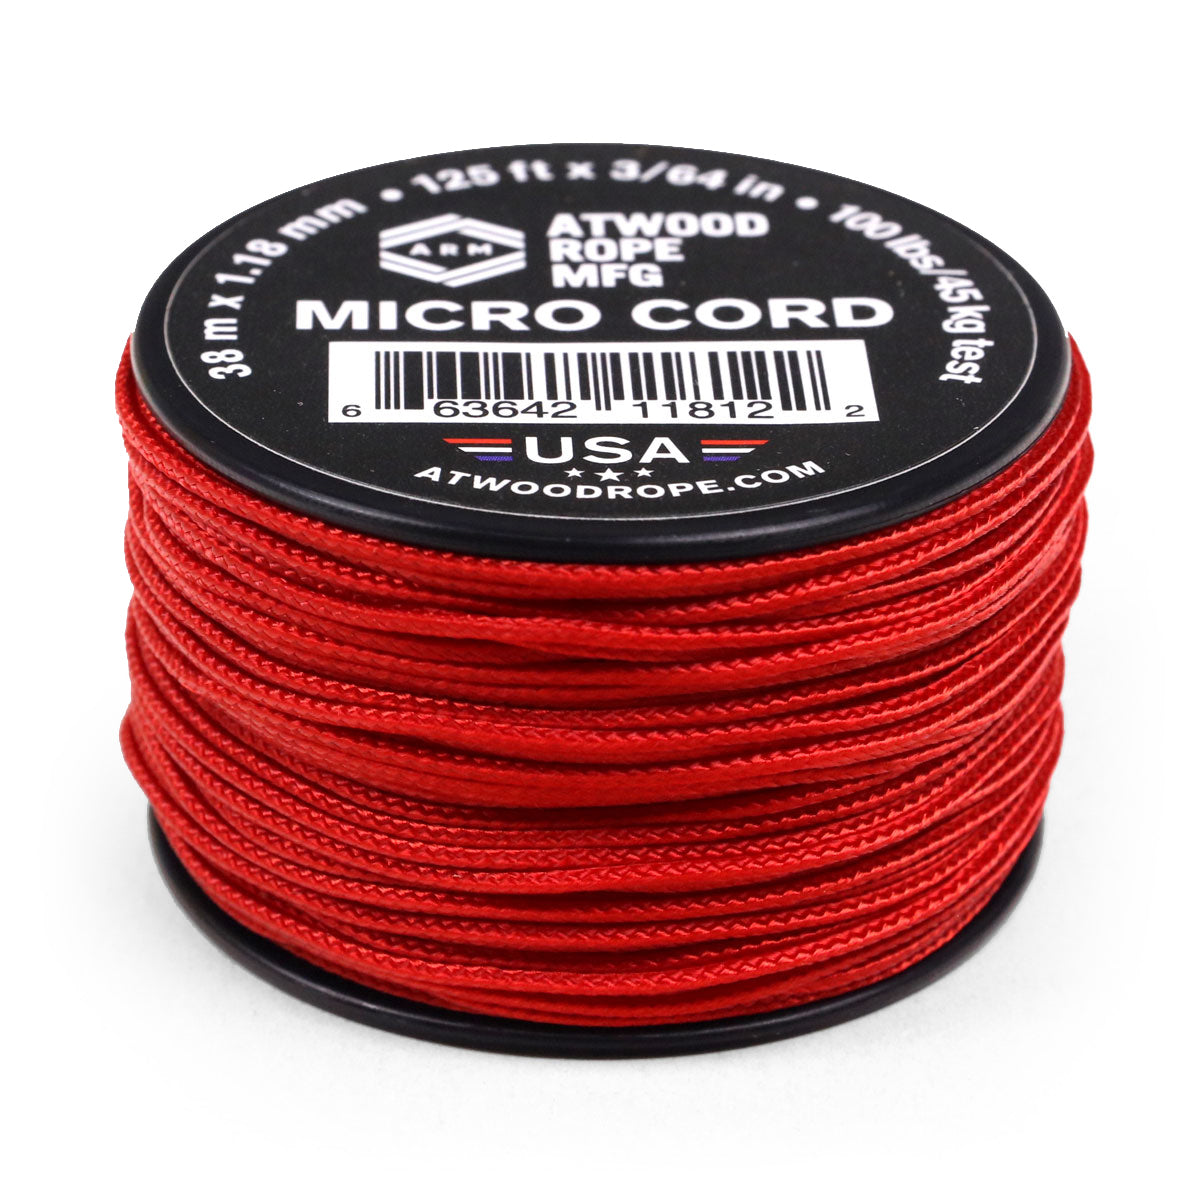 1.18mm Cord - Red – Rope MFG